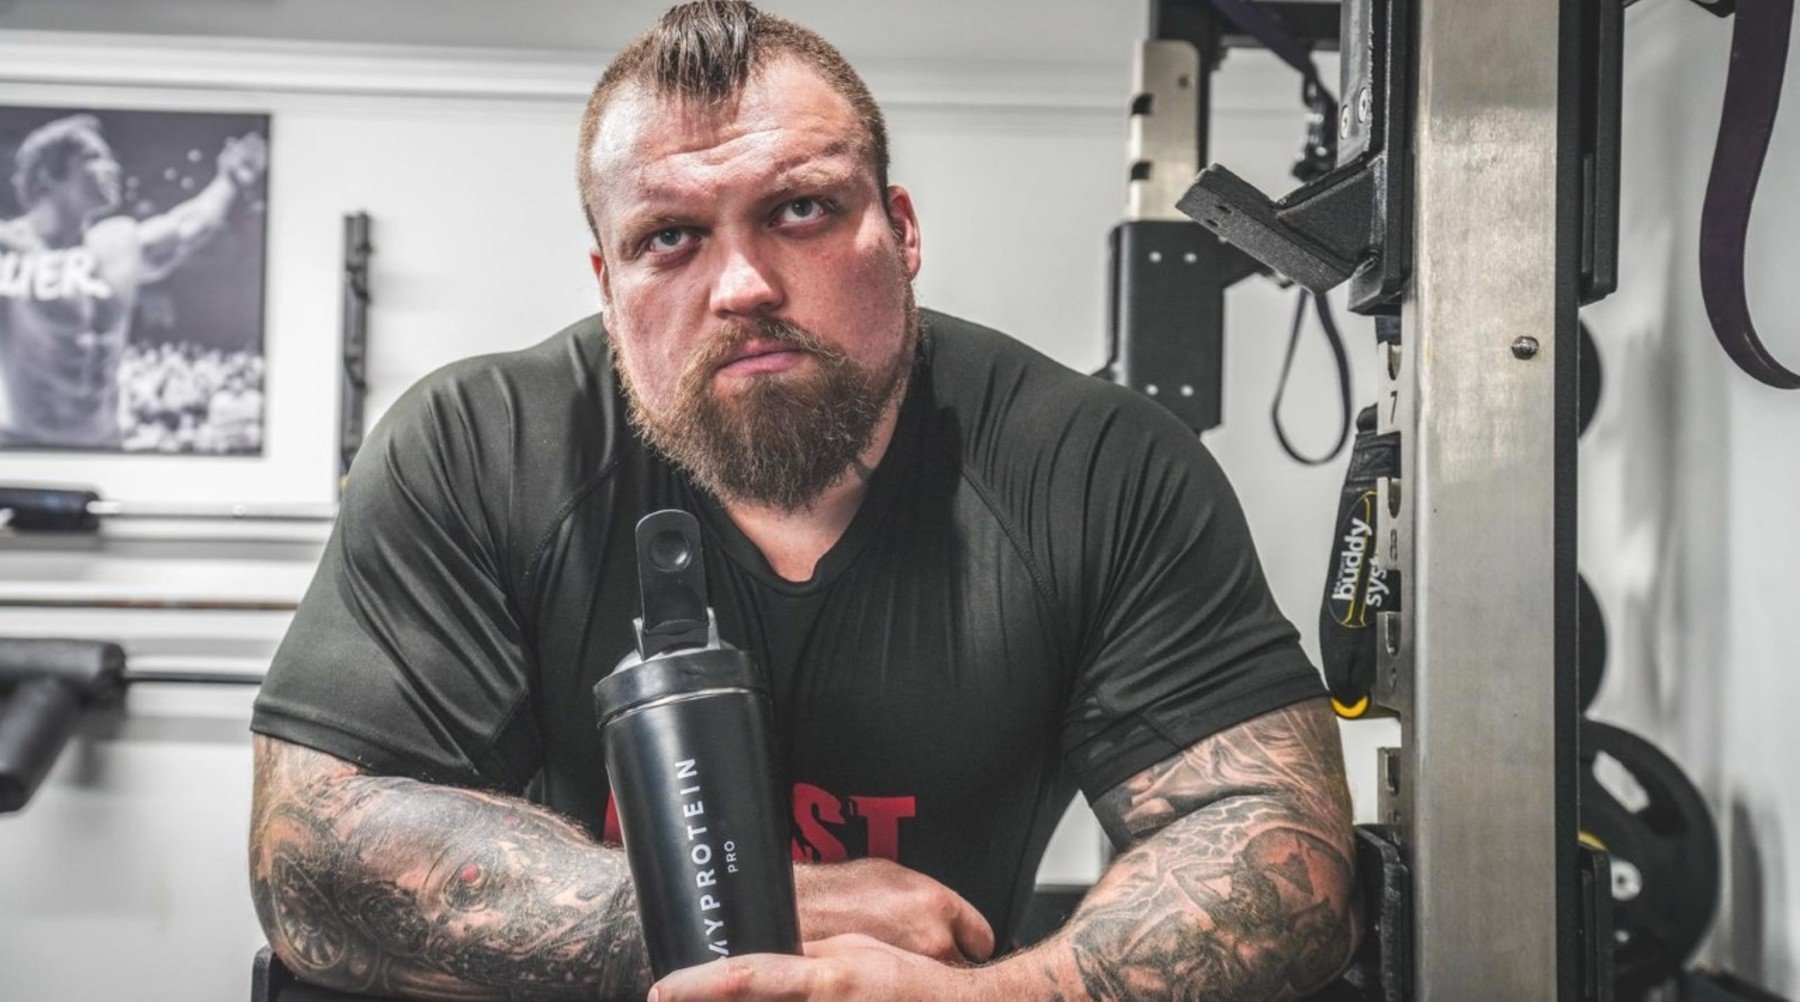 How Eddie Hall Used To Fit In Over 12,000 Calories Every Day